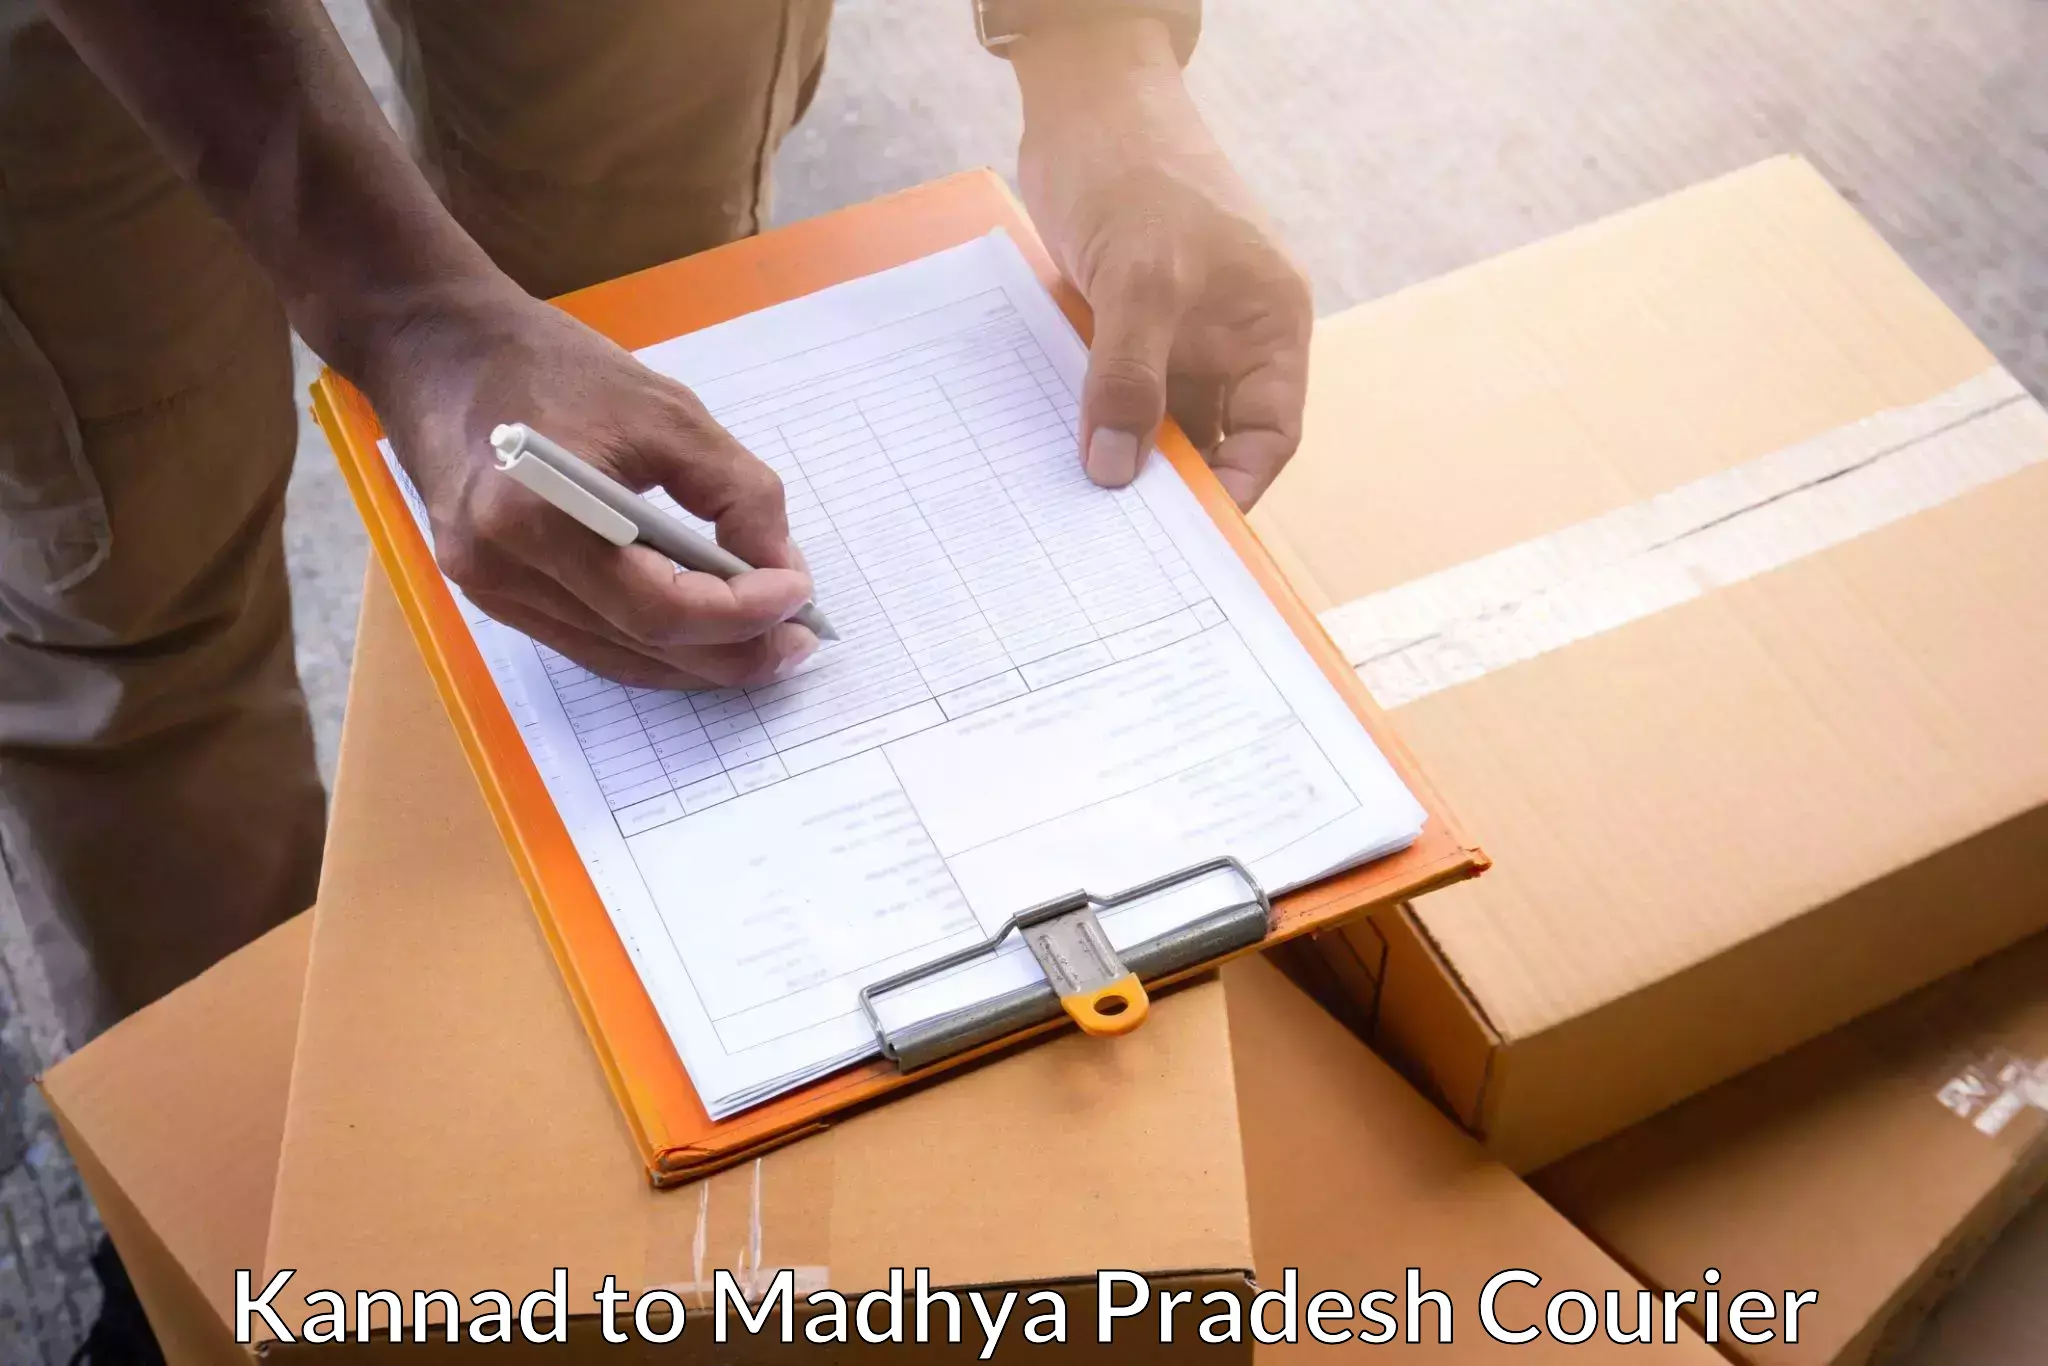 Next-day delivery options Kannad to Gwalior